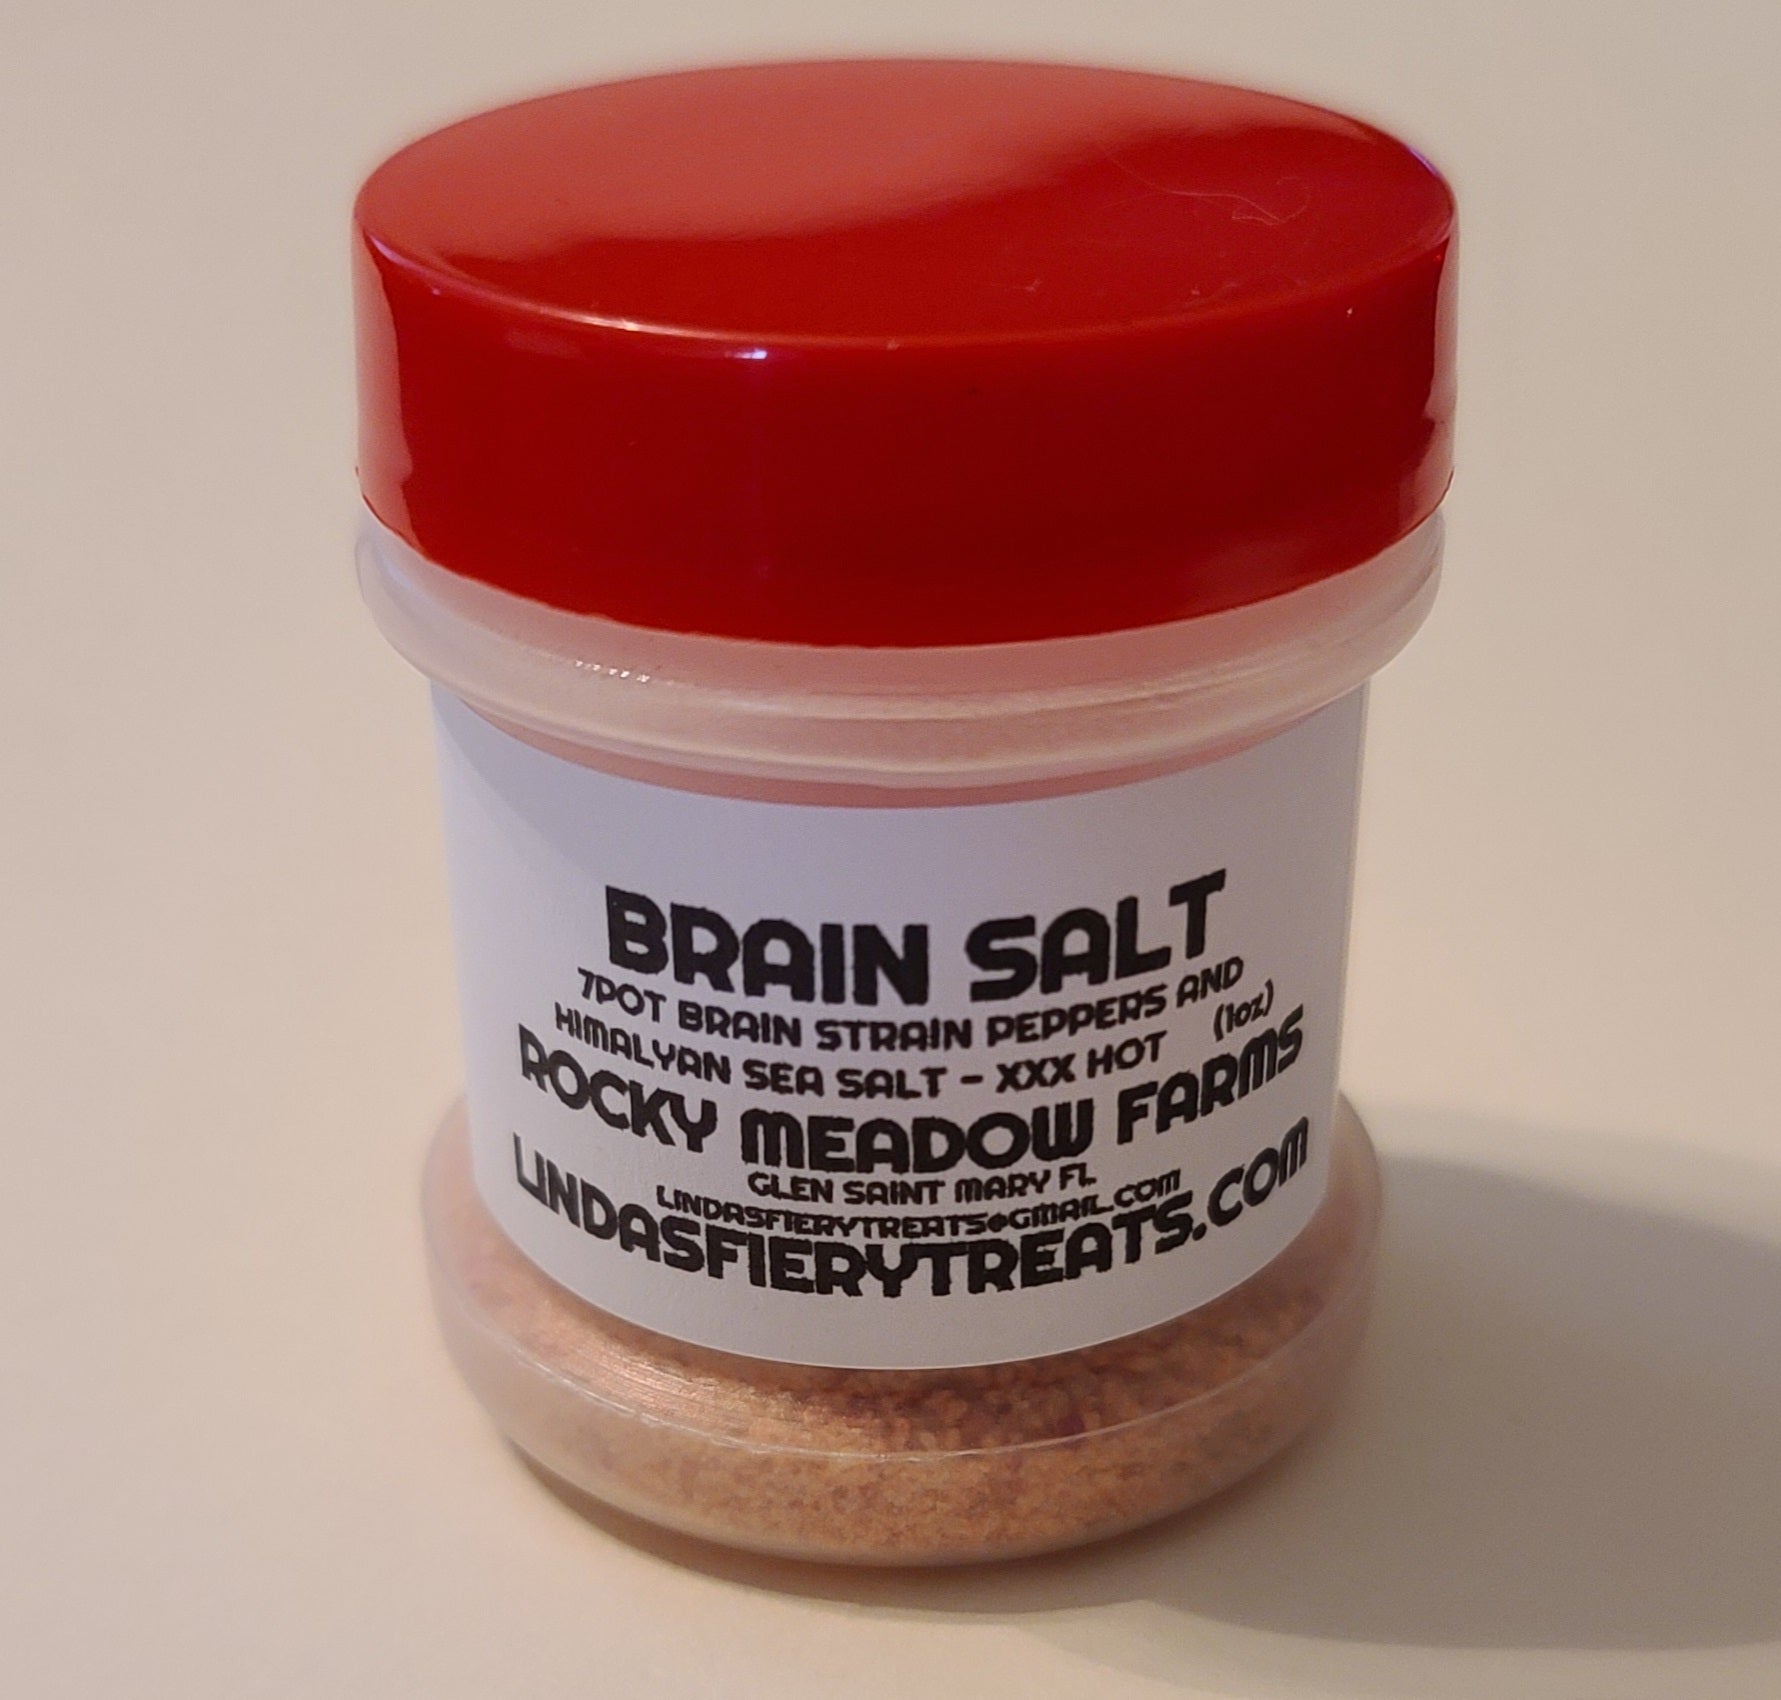 Brain Salt - Super spicy and flavorful finishing salt.  Gives any dish a great kick of heat.  Made with fresh 7-pot Brain Strain peppers and Himalayan sea salt.  This is easily one of our most popular items that folks quickly come back for more. - Ingredients: 7 Pot Brain Strain Peppers, Himalayan Sea Salt - XXX HOT